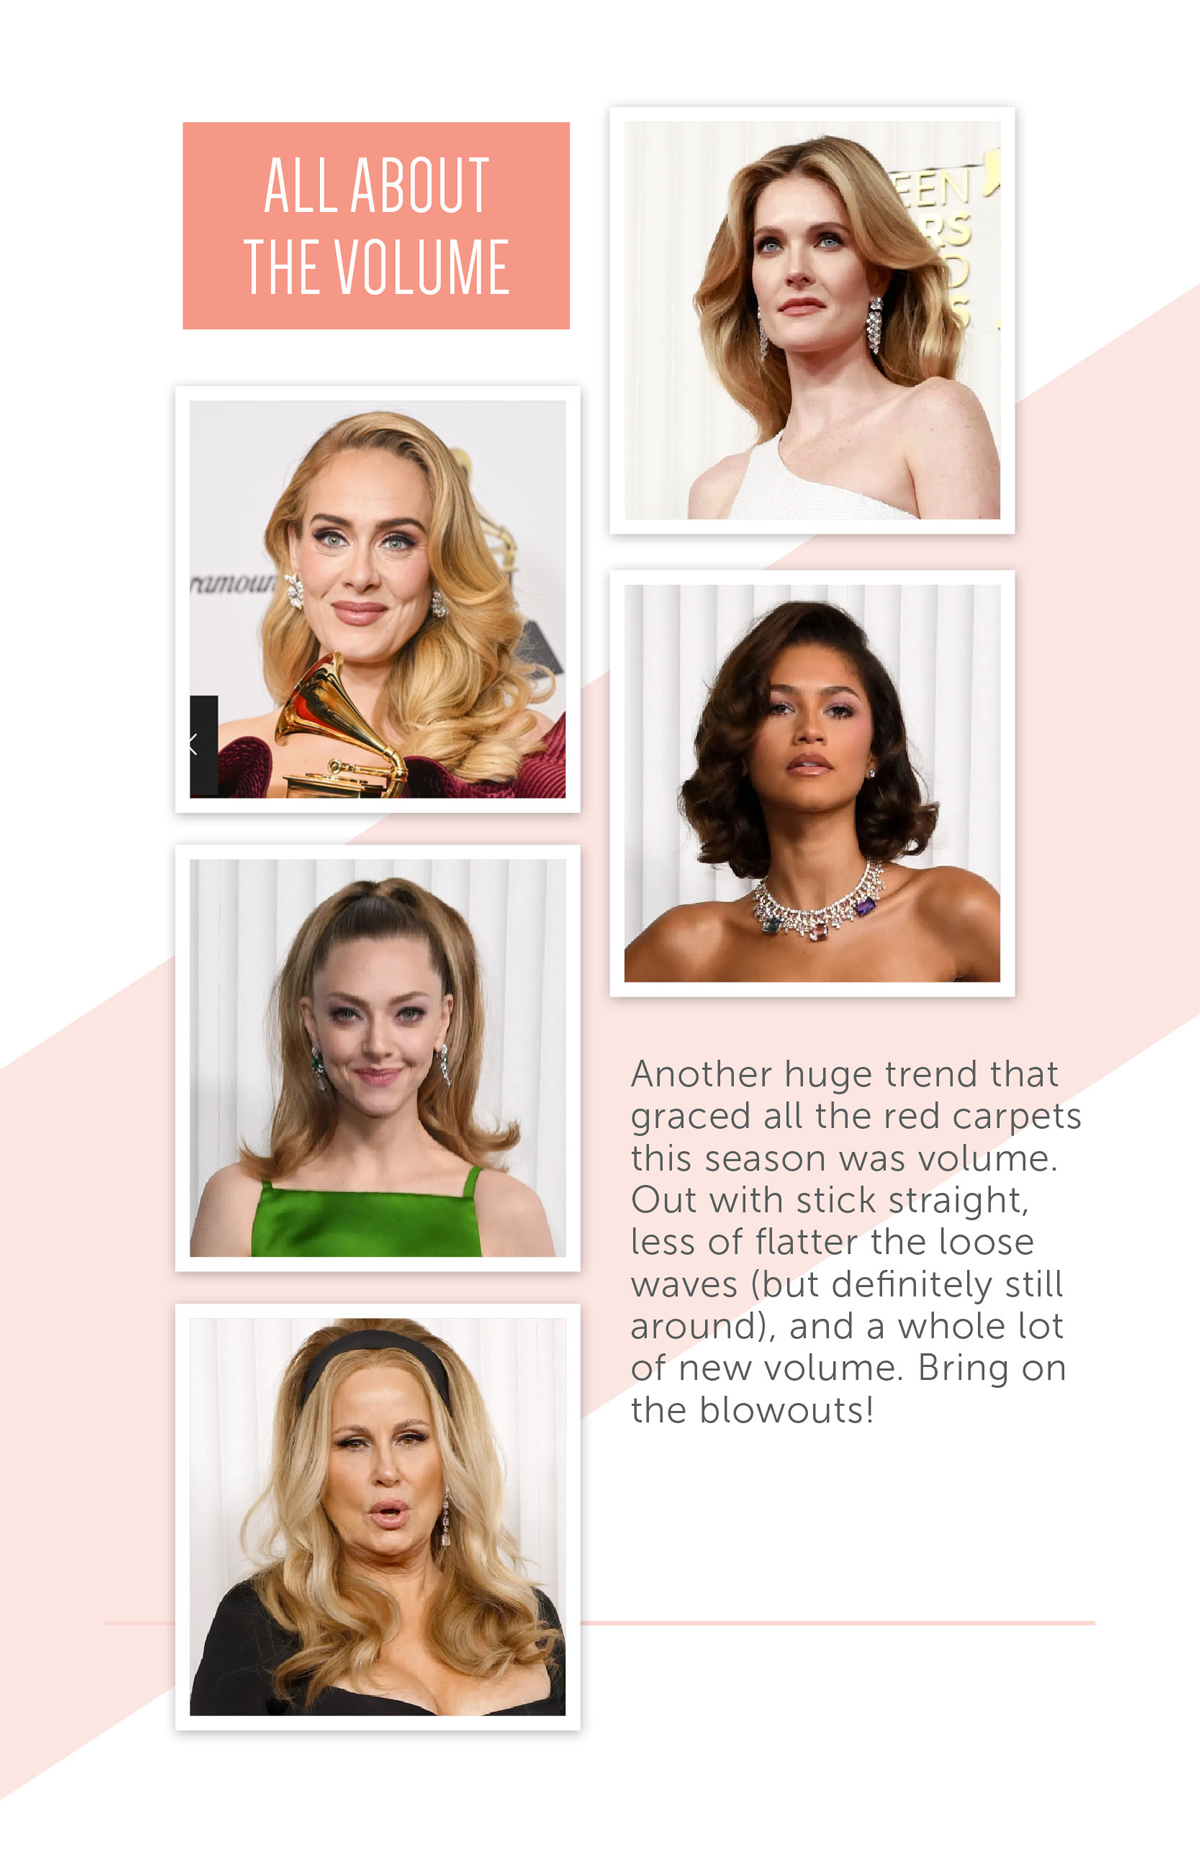 All About The Volume Another huge trend that graced all the red carpets this season was volume. Out with stick straight, less of flatter the loose waves (but definitely still around), and a whole lot of new volume. Bring on the blowouts!